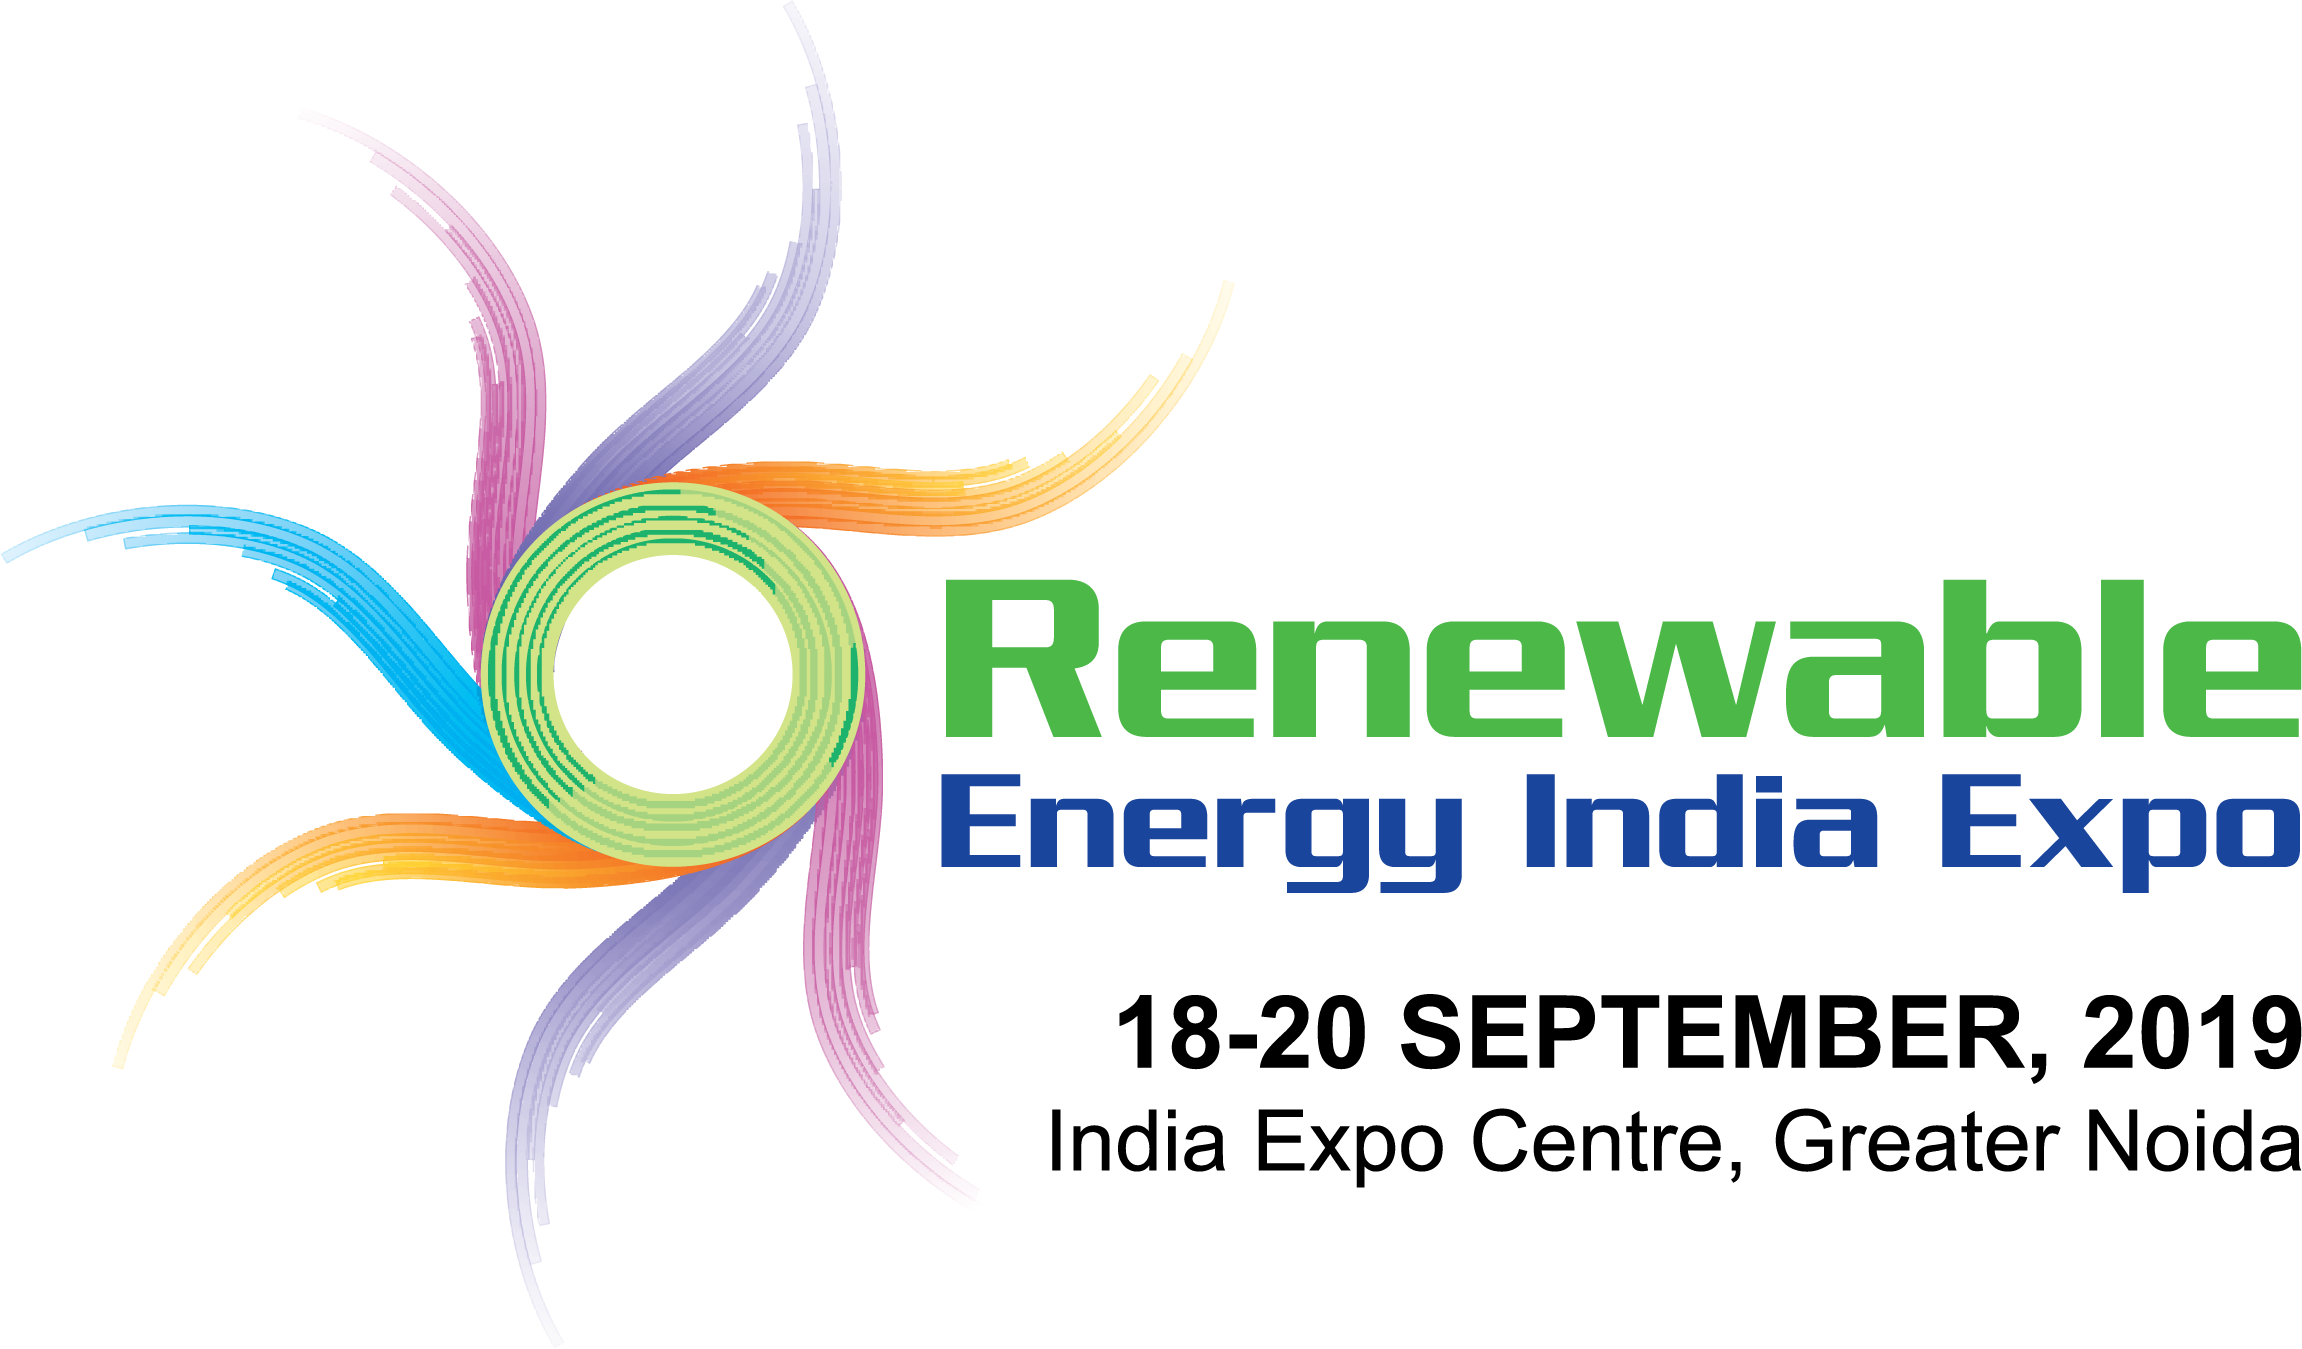 HENGXING Technology once again participated in the Renewable Energy India Expo